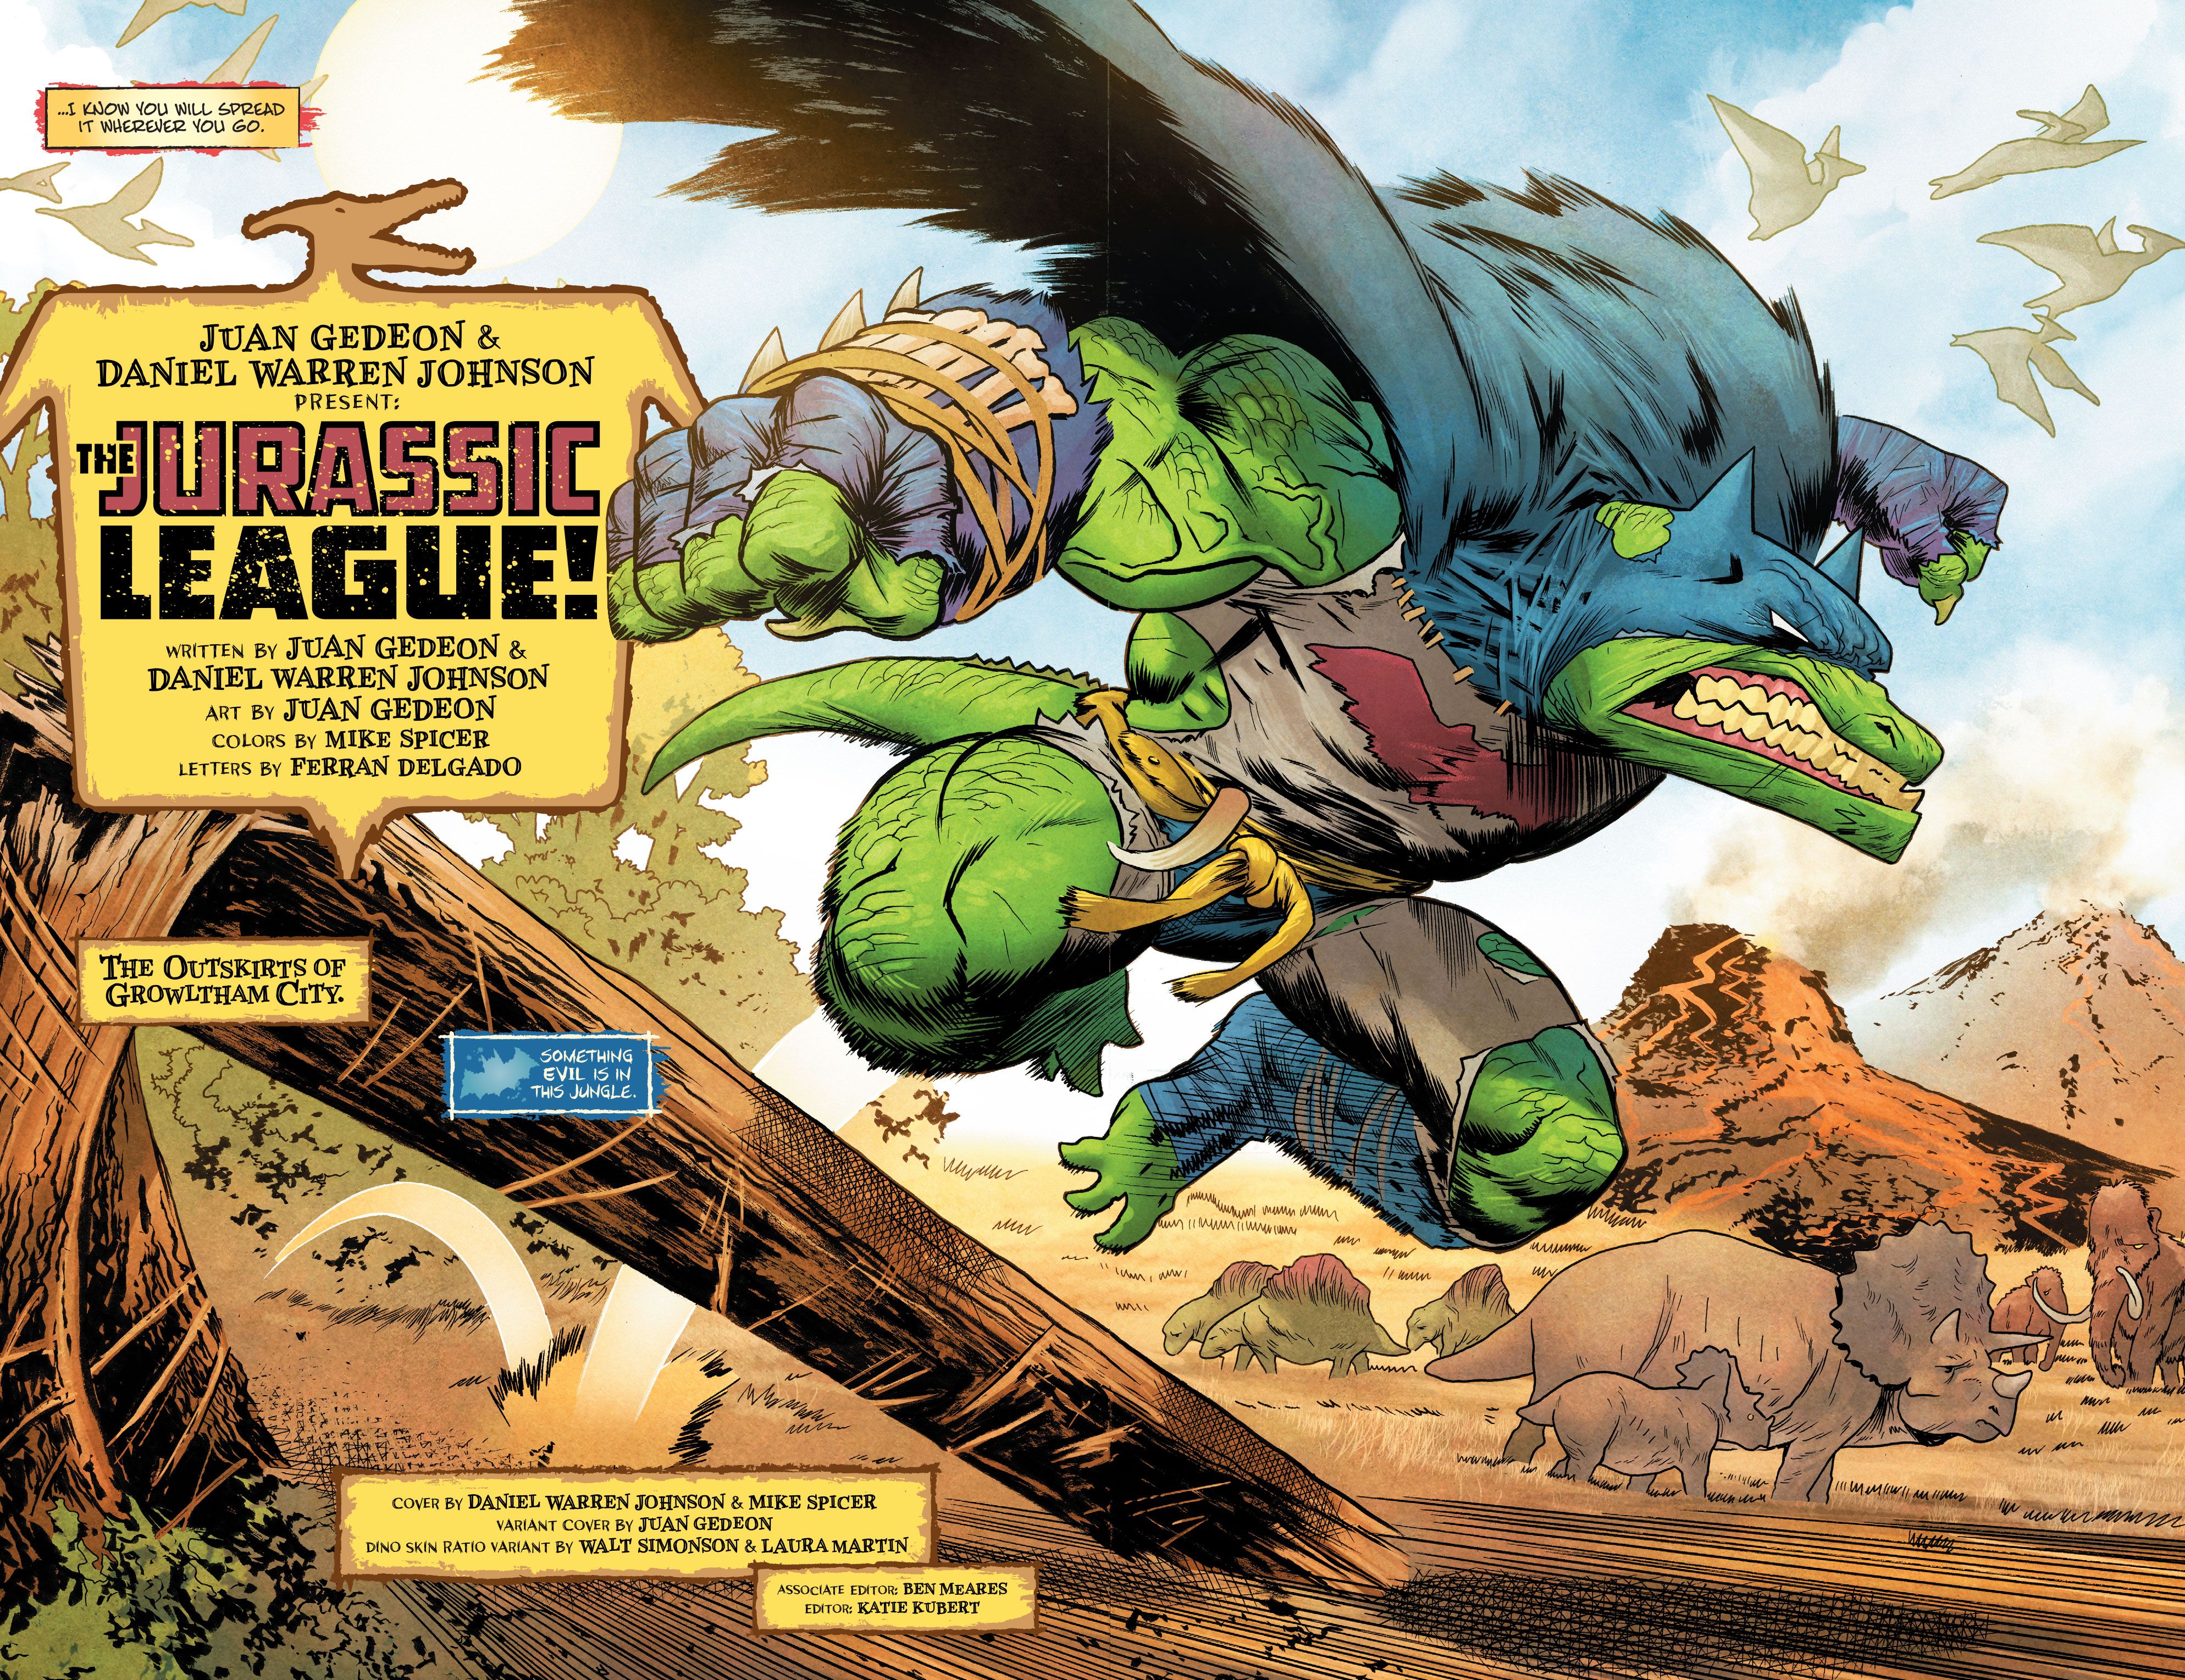 REVIEW DCs The Jurassic League #1